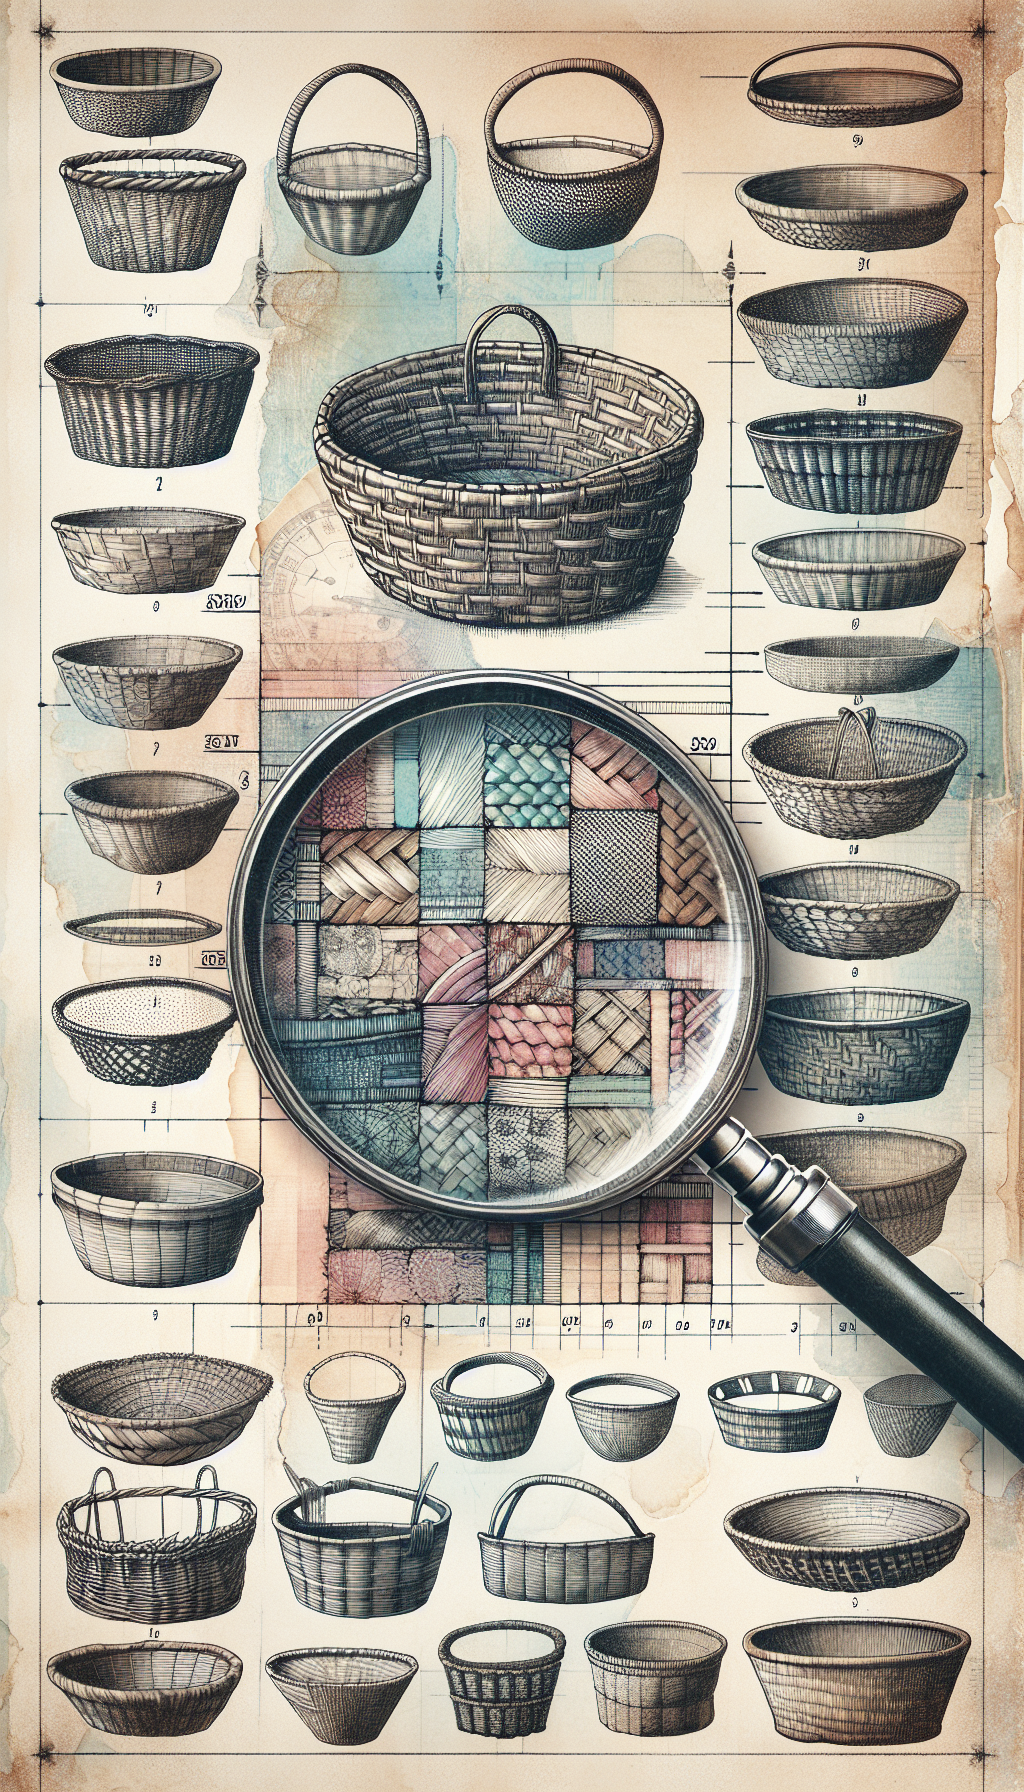 A whimsical collage-style illustration showcases a magnifying glass hovering over a patchwork of baskets, each sporting a distinct weave pattern and patina. Within the magnifying circle, sketched details jump out: faded color hints and frayed edges, while timestamps and subtle visual clues adorn the borders, guiding the viewer's eye in determining the vintage of each antique basket.